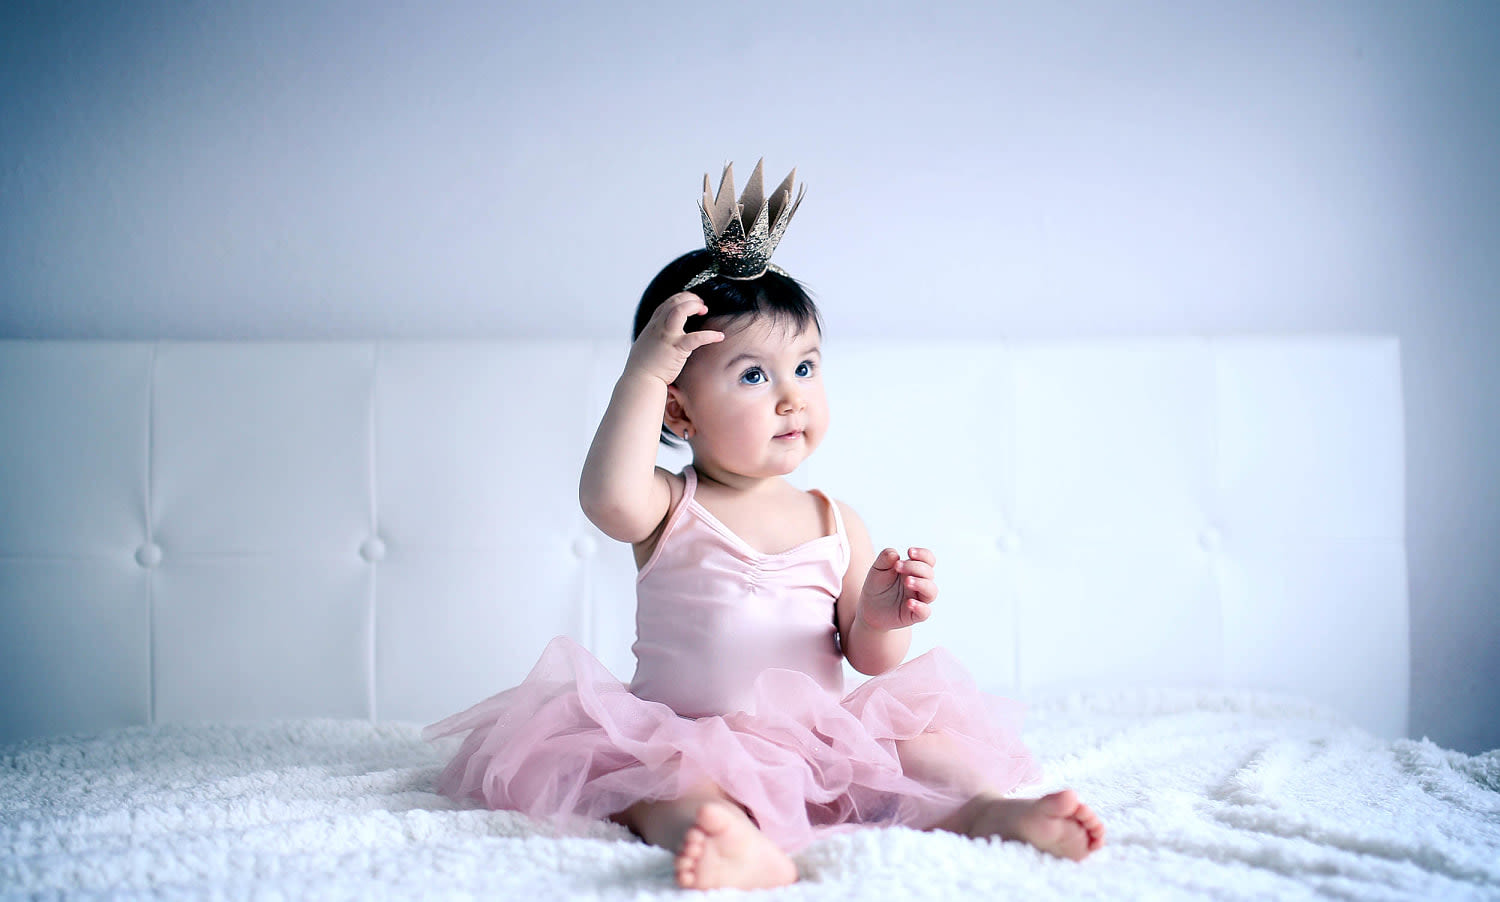 100 Disney-inspired baby names for your little prince or princess